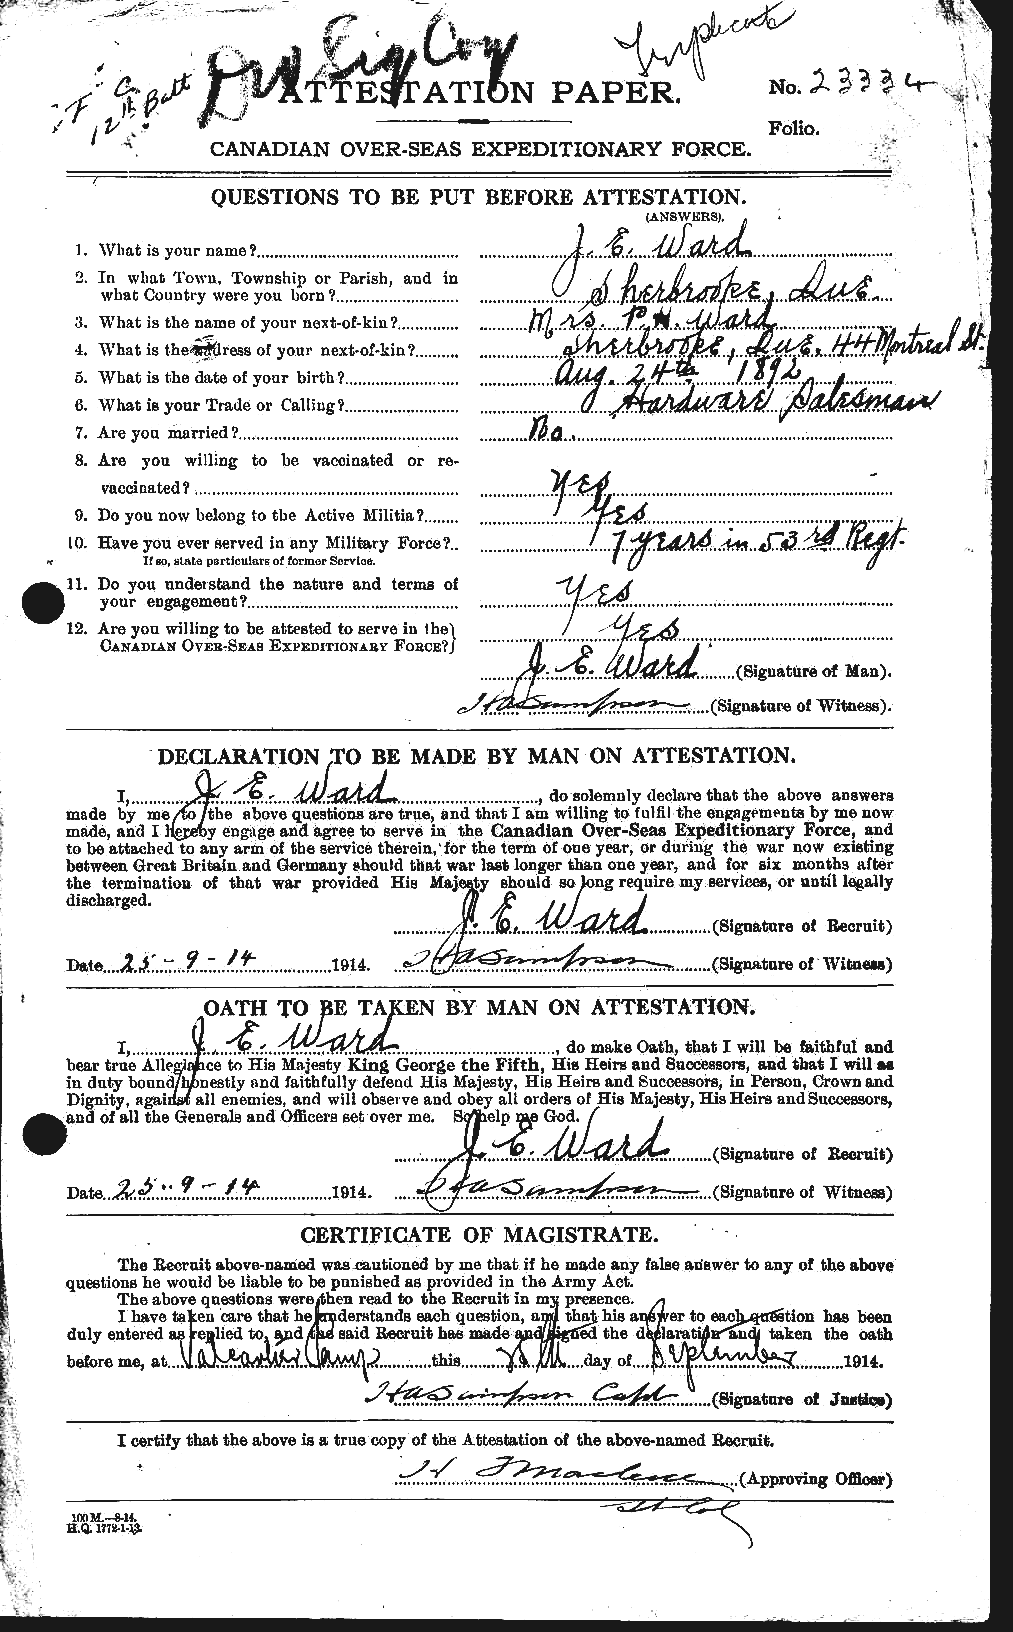 Personnel Records of the First World War - CEF 657869a